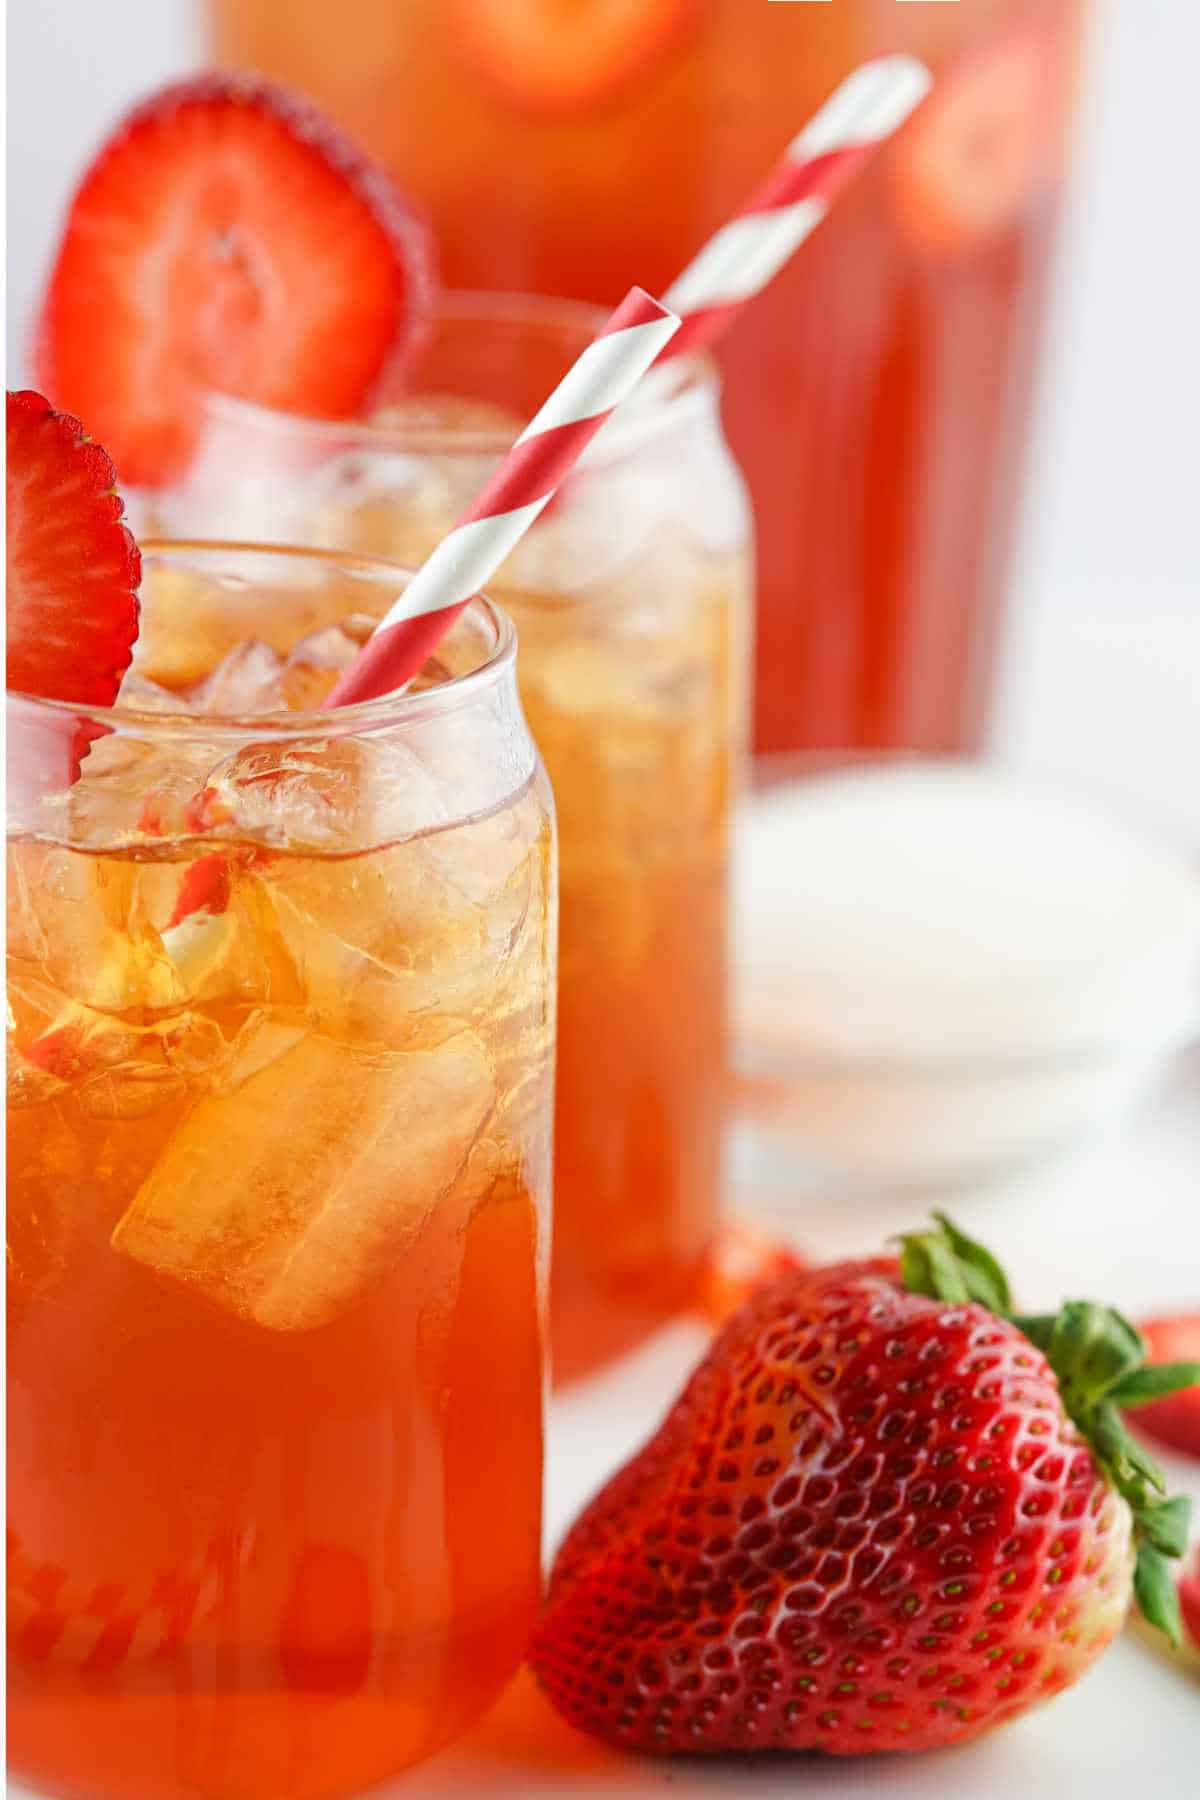 two tall glasses of strawberry Arnold Palmer with straws and strawberry garnish.